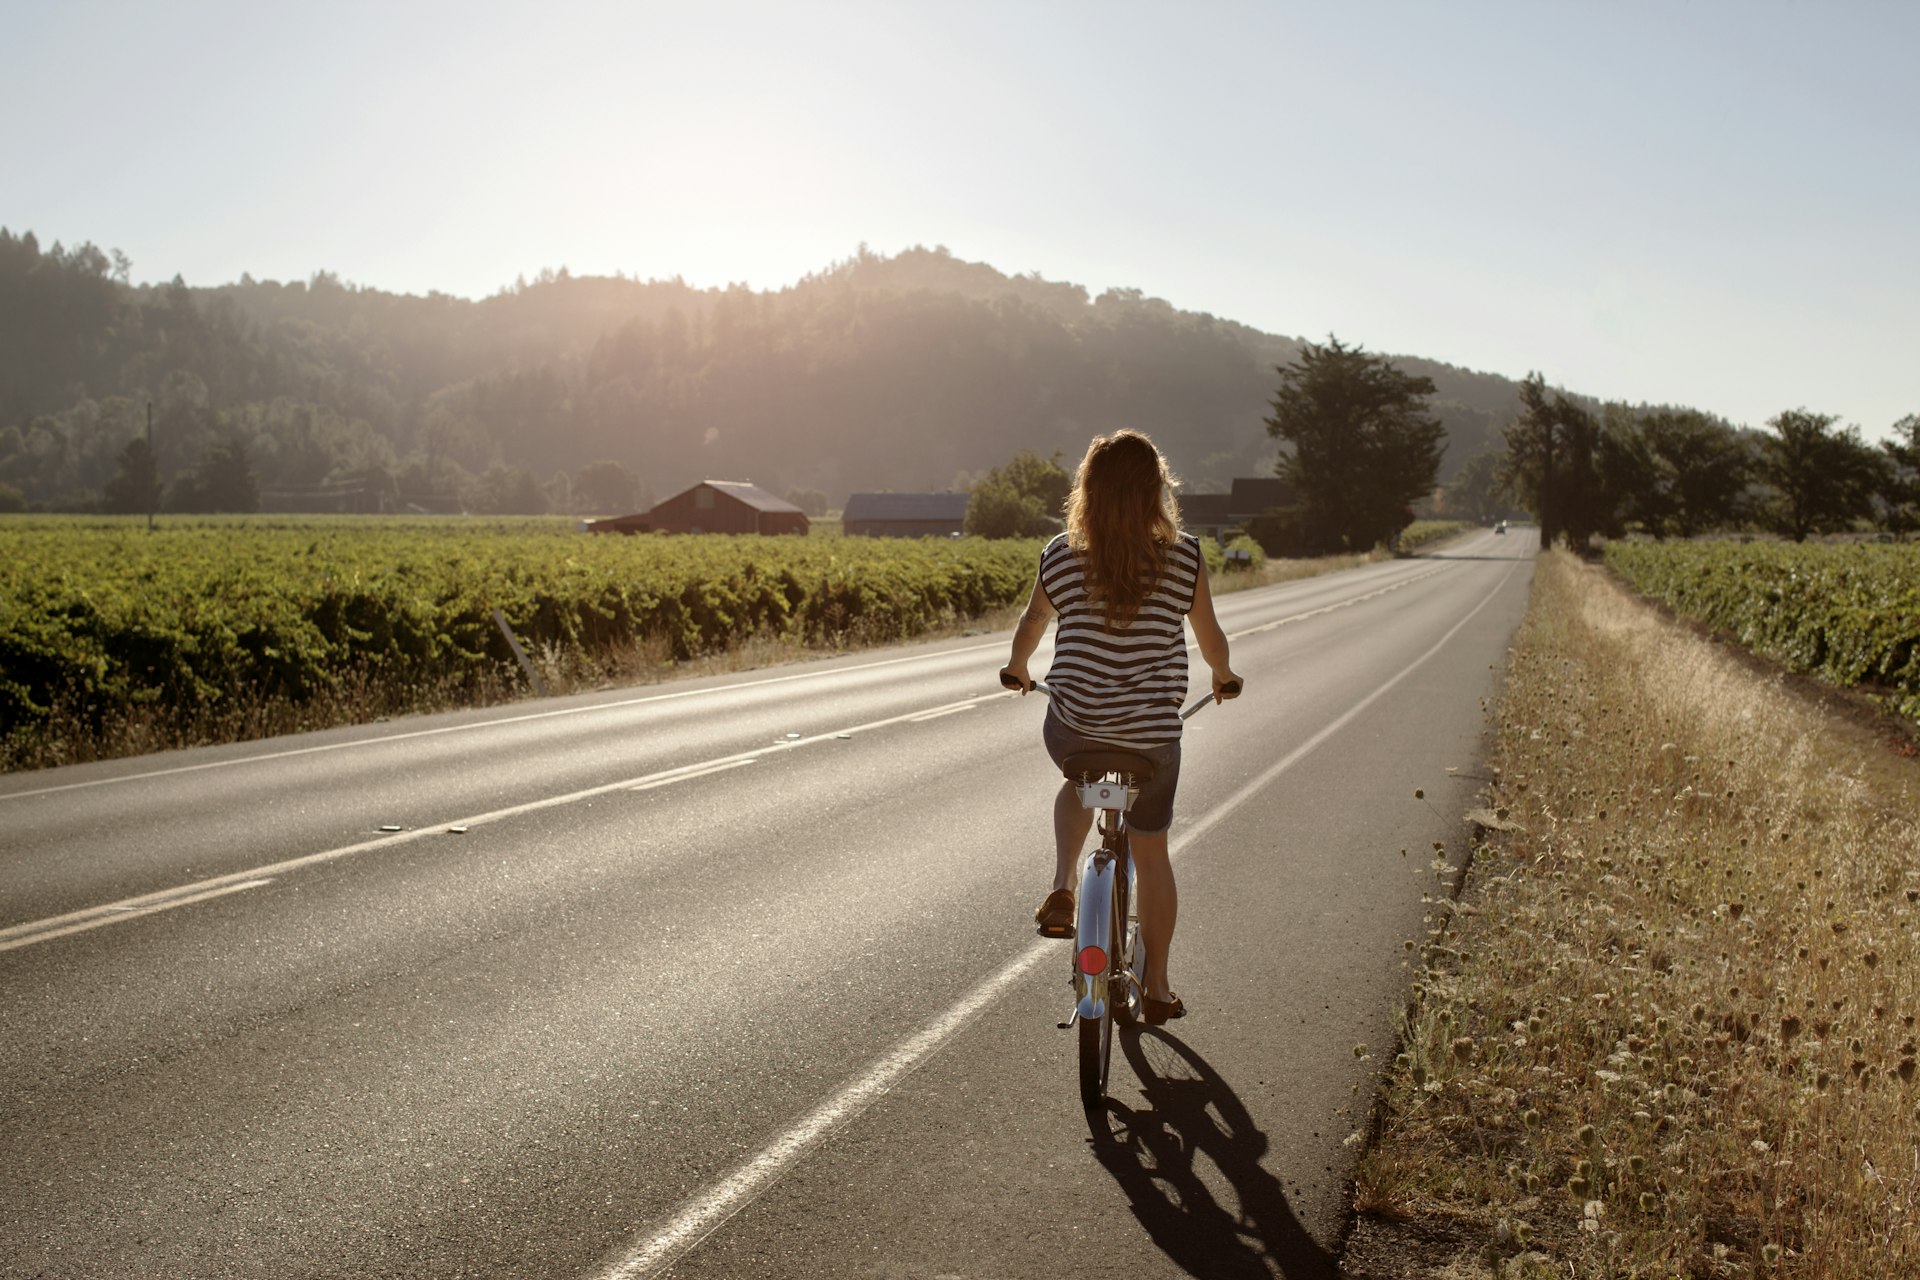 Rear view of woman cycling on road amidst vineyards as the sun sets